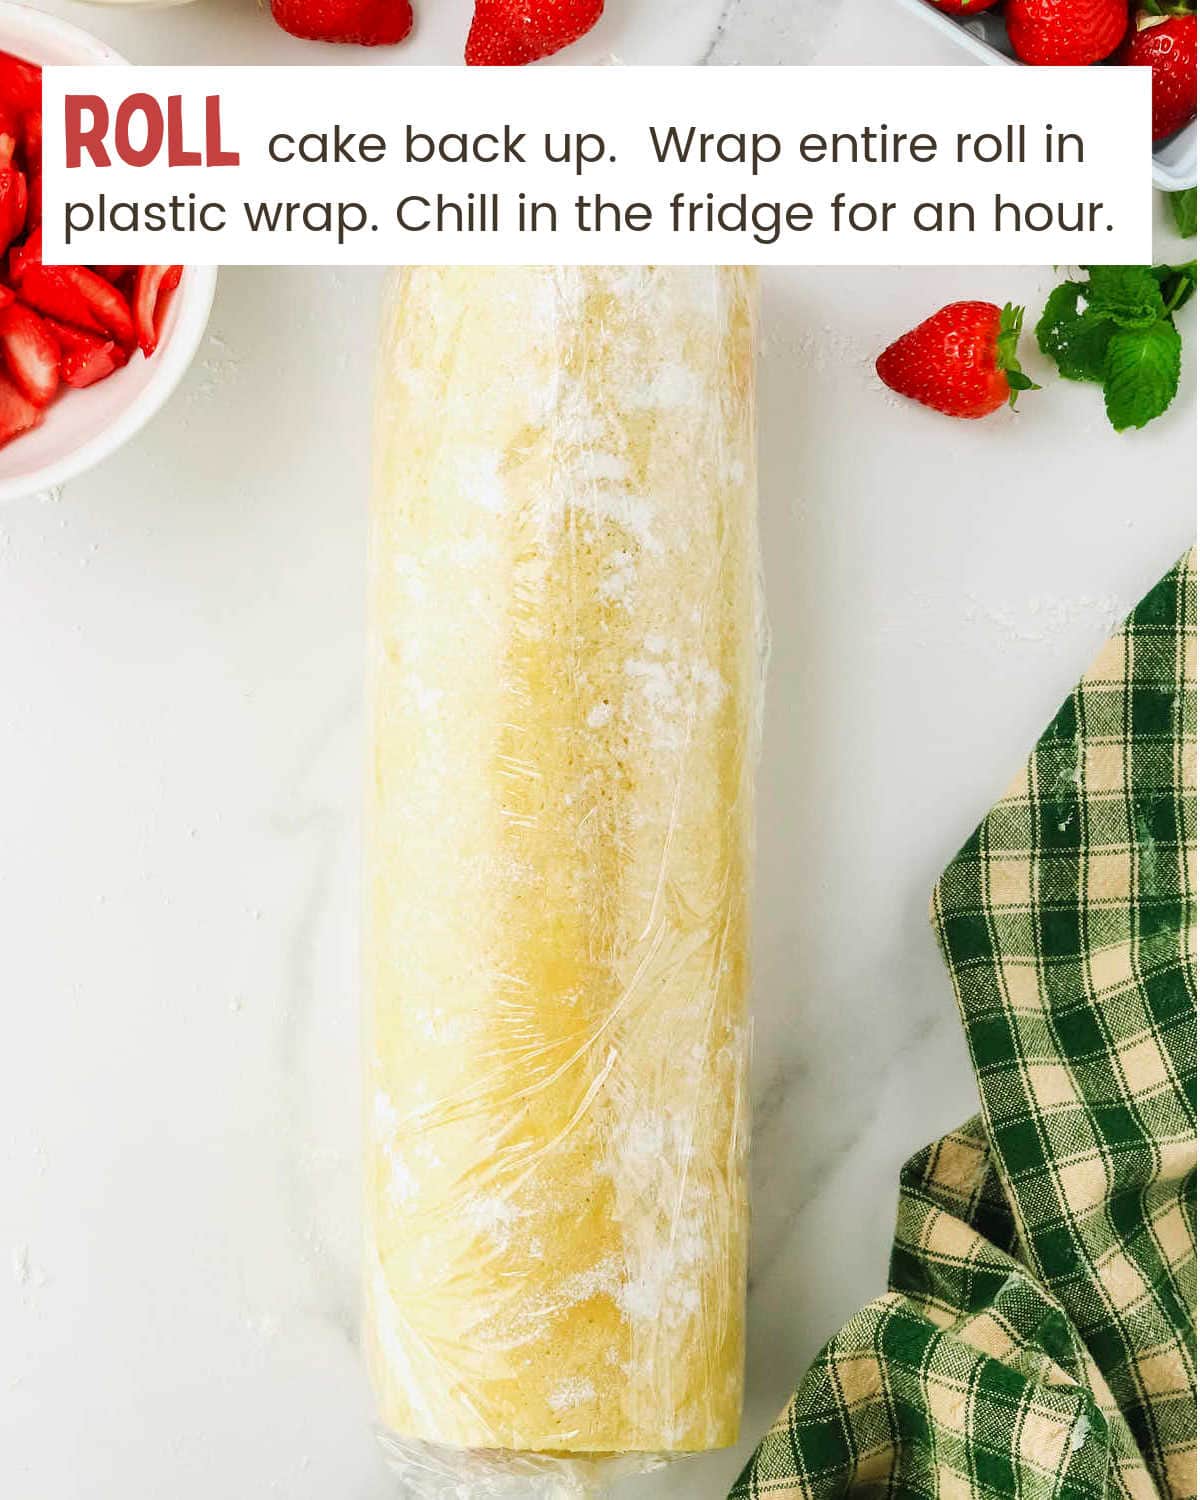 Roll Strawberry Shortcake Roll back up, wrap in plastic wrap, chill in the fridge for an hour.